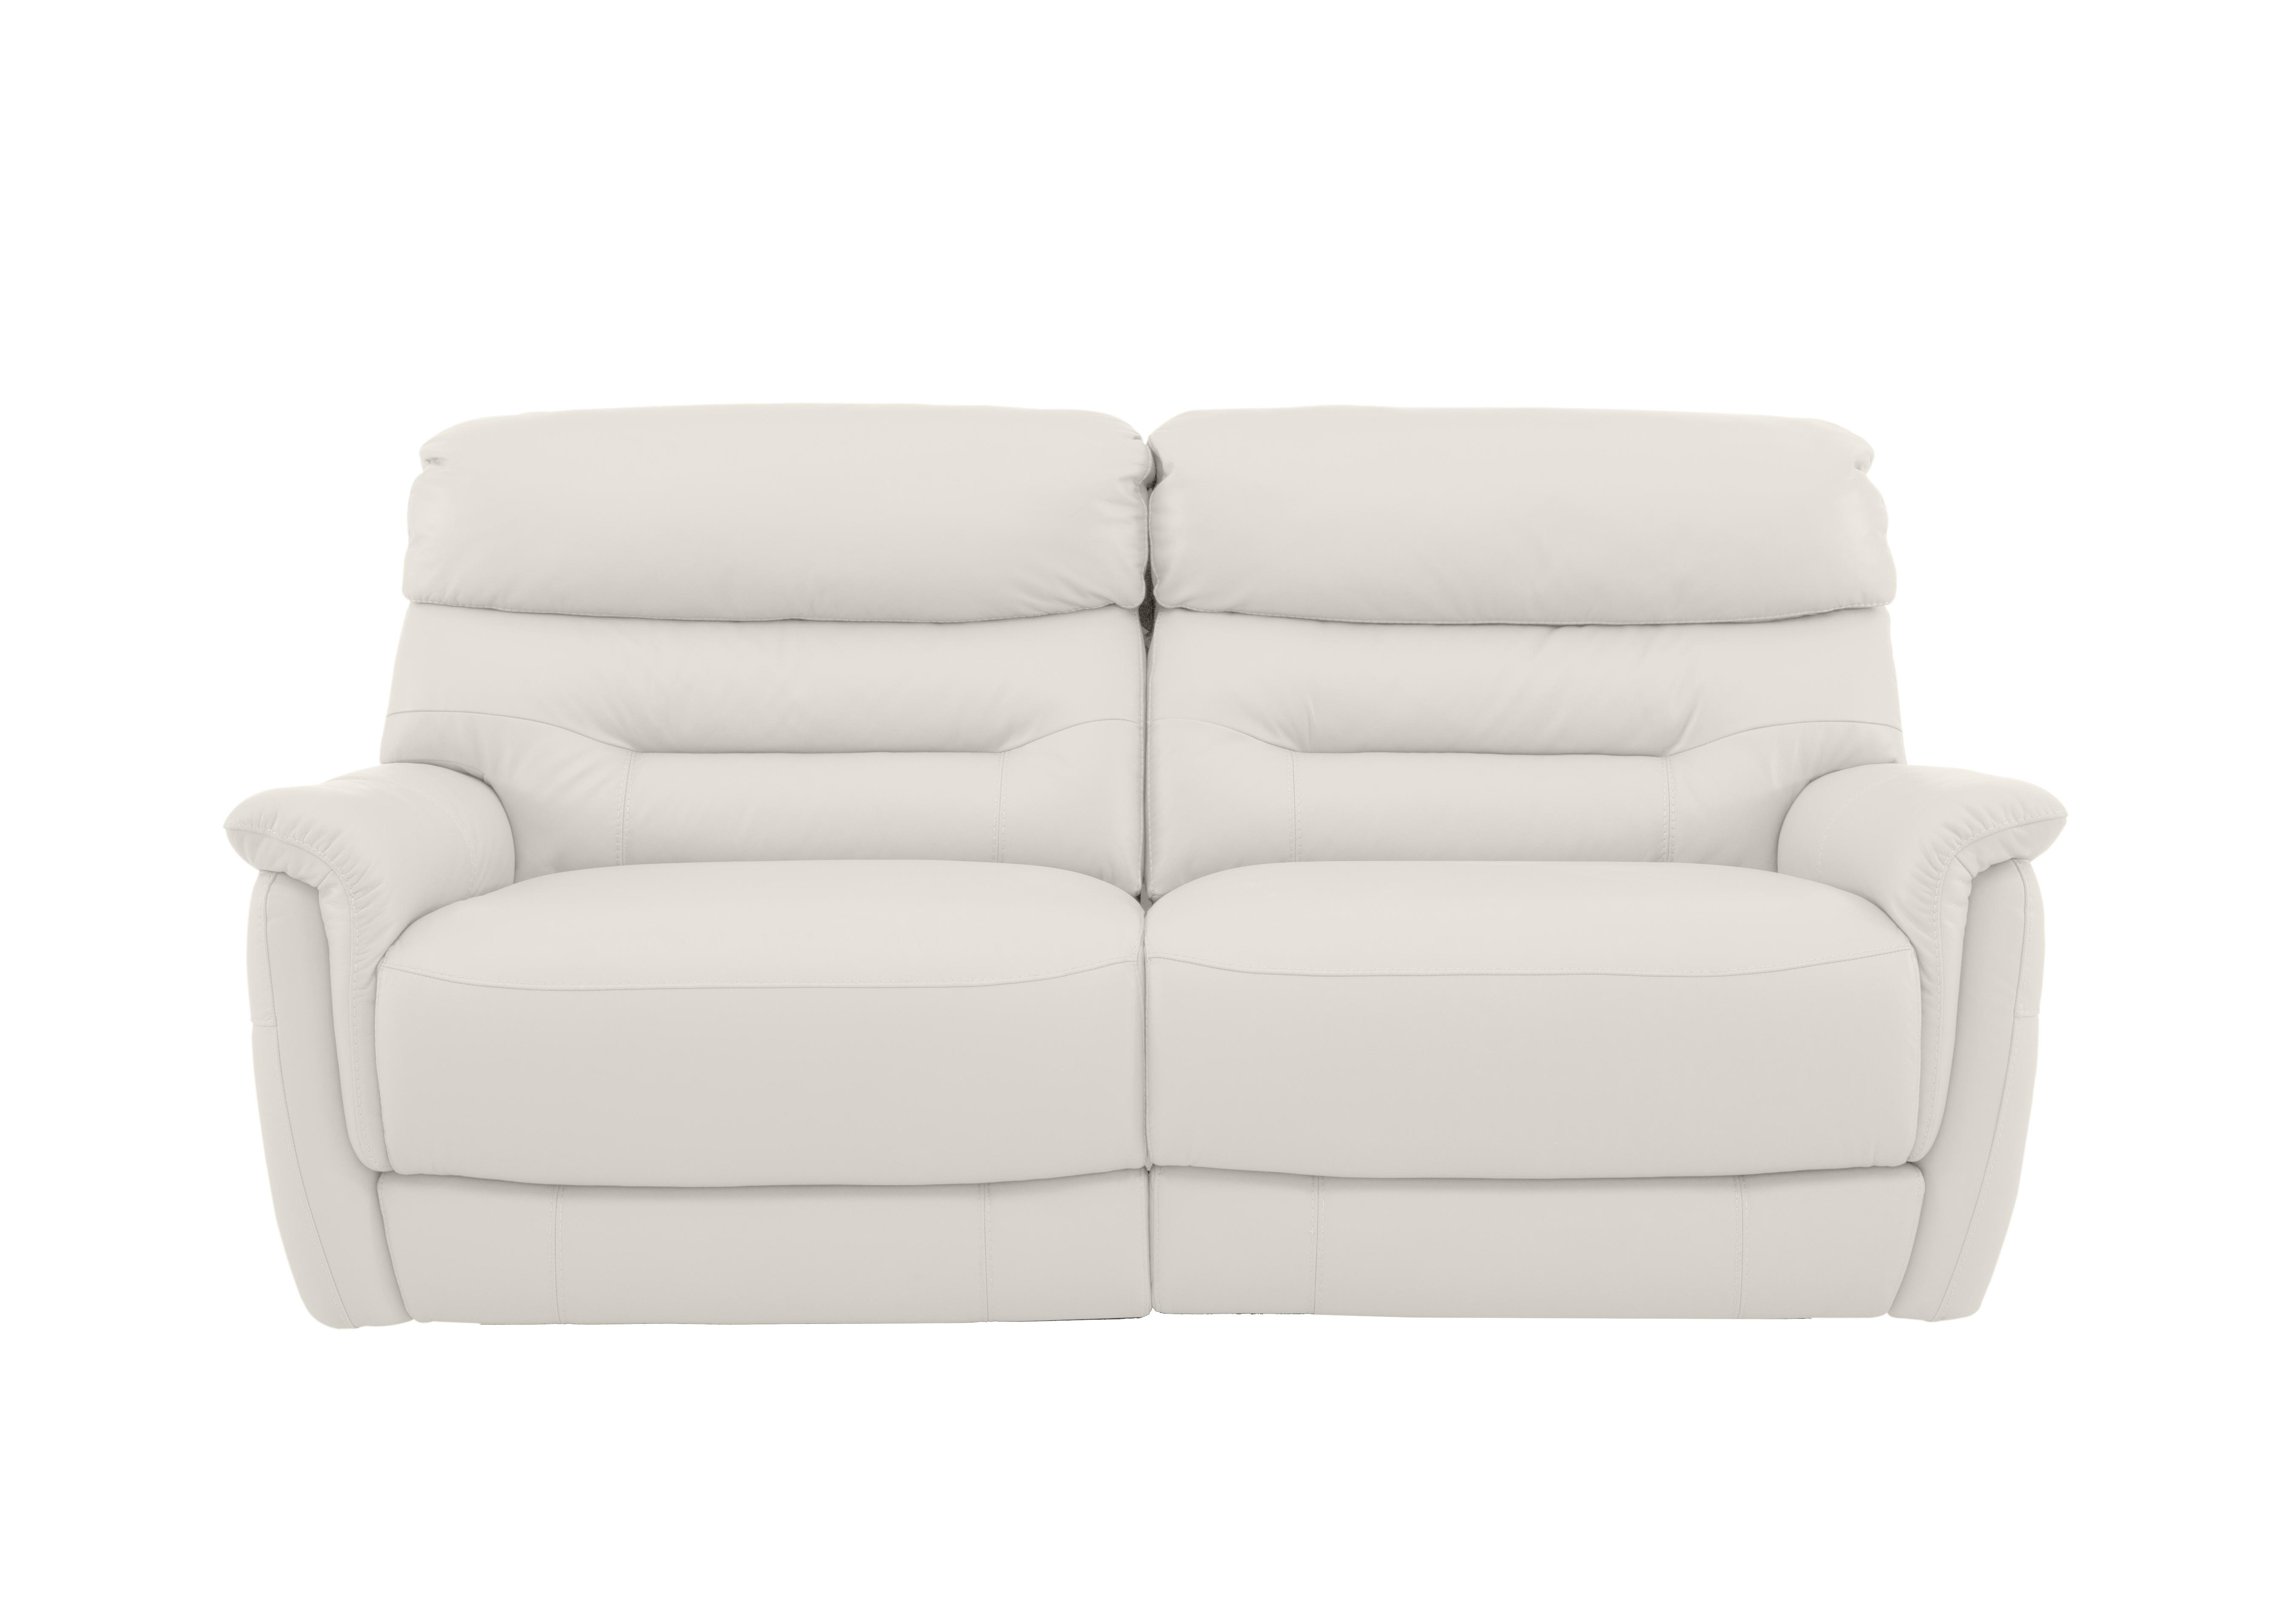 Chicago 3 Seater Leather Sofa in Bv-744d Star White on Furniture Village